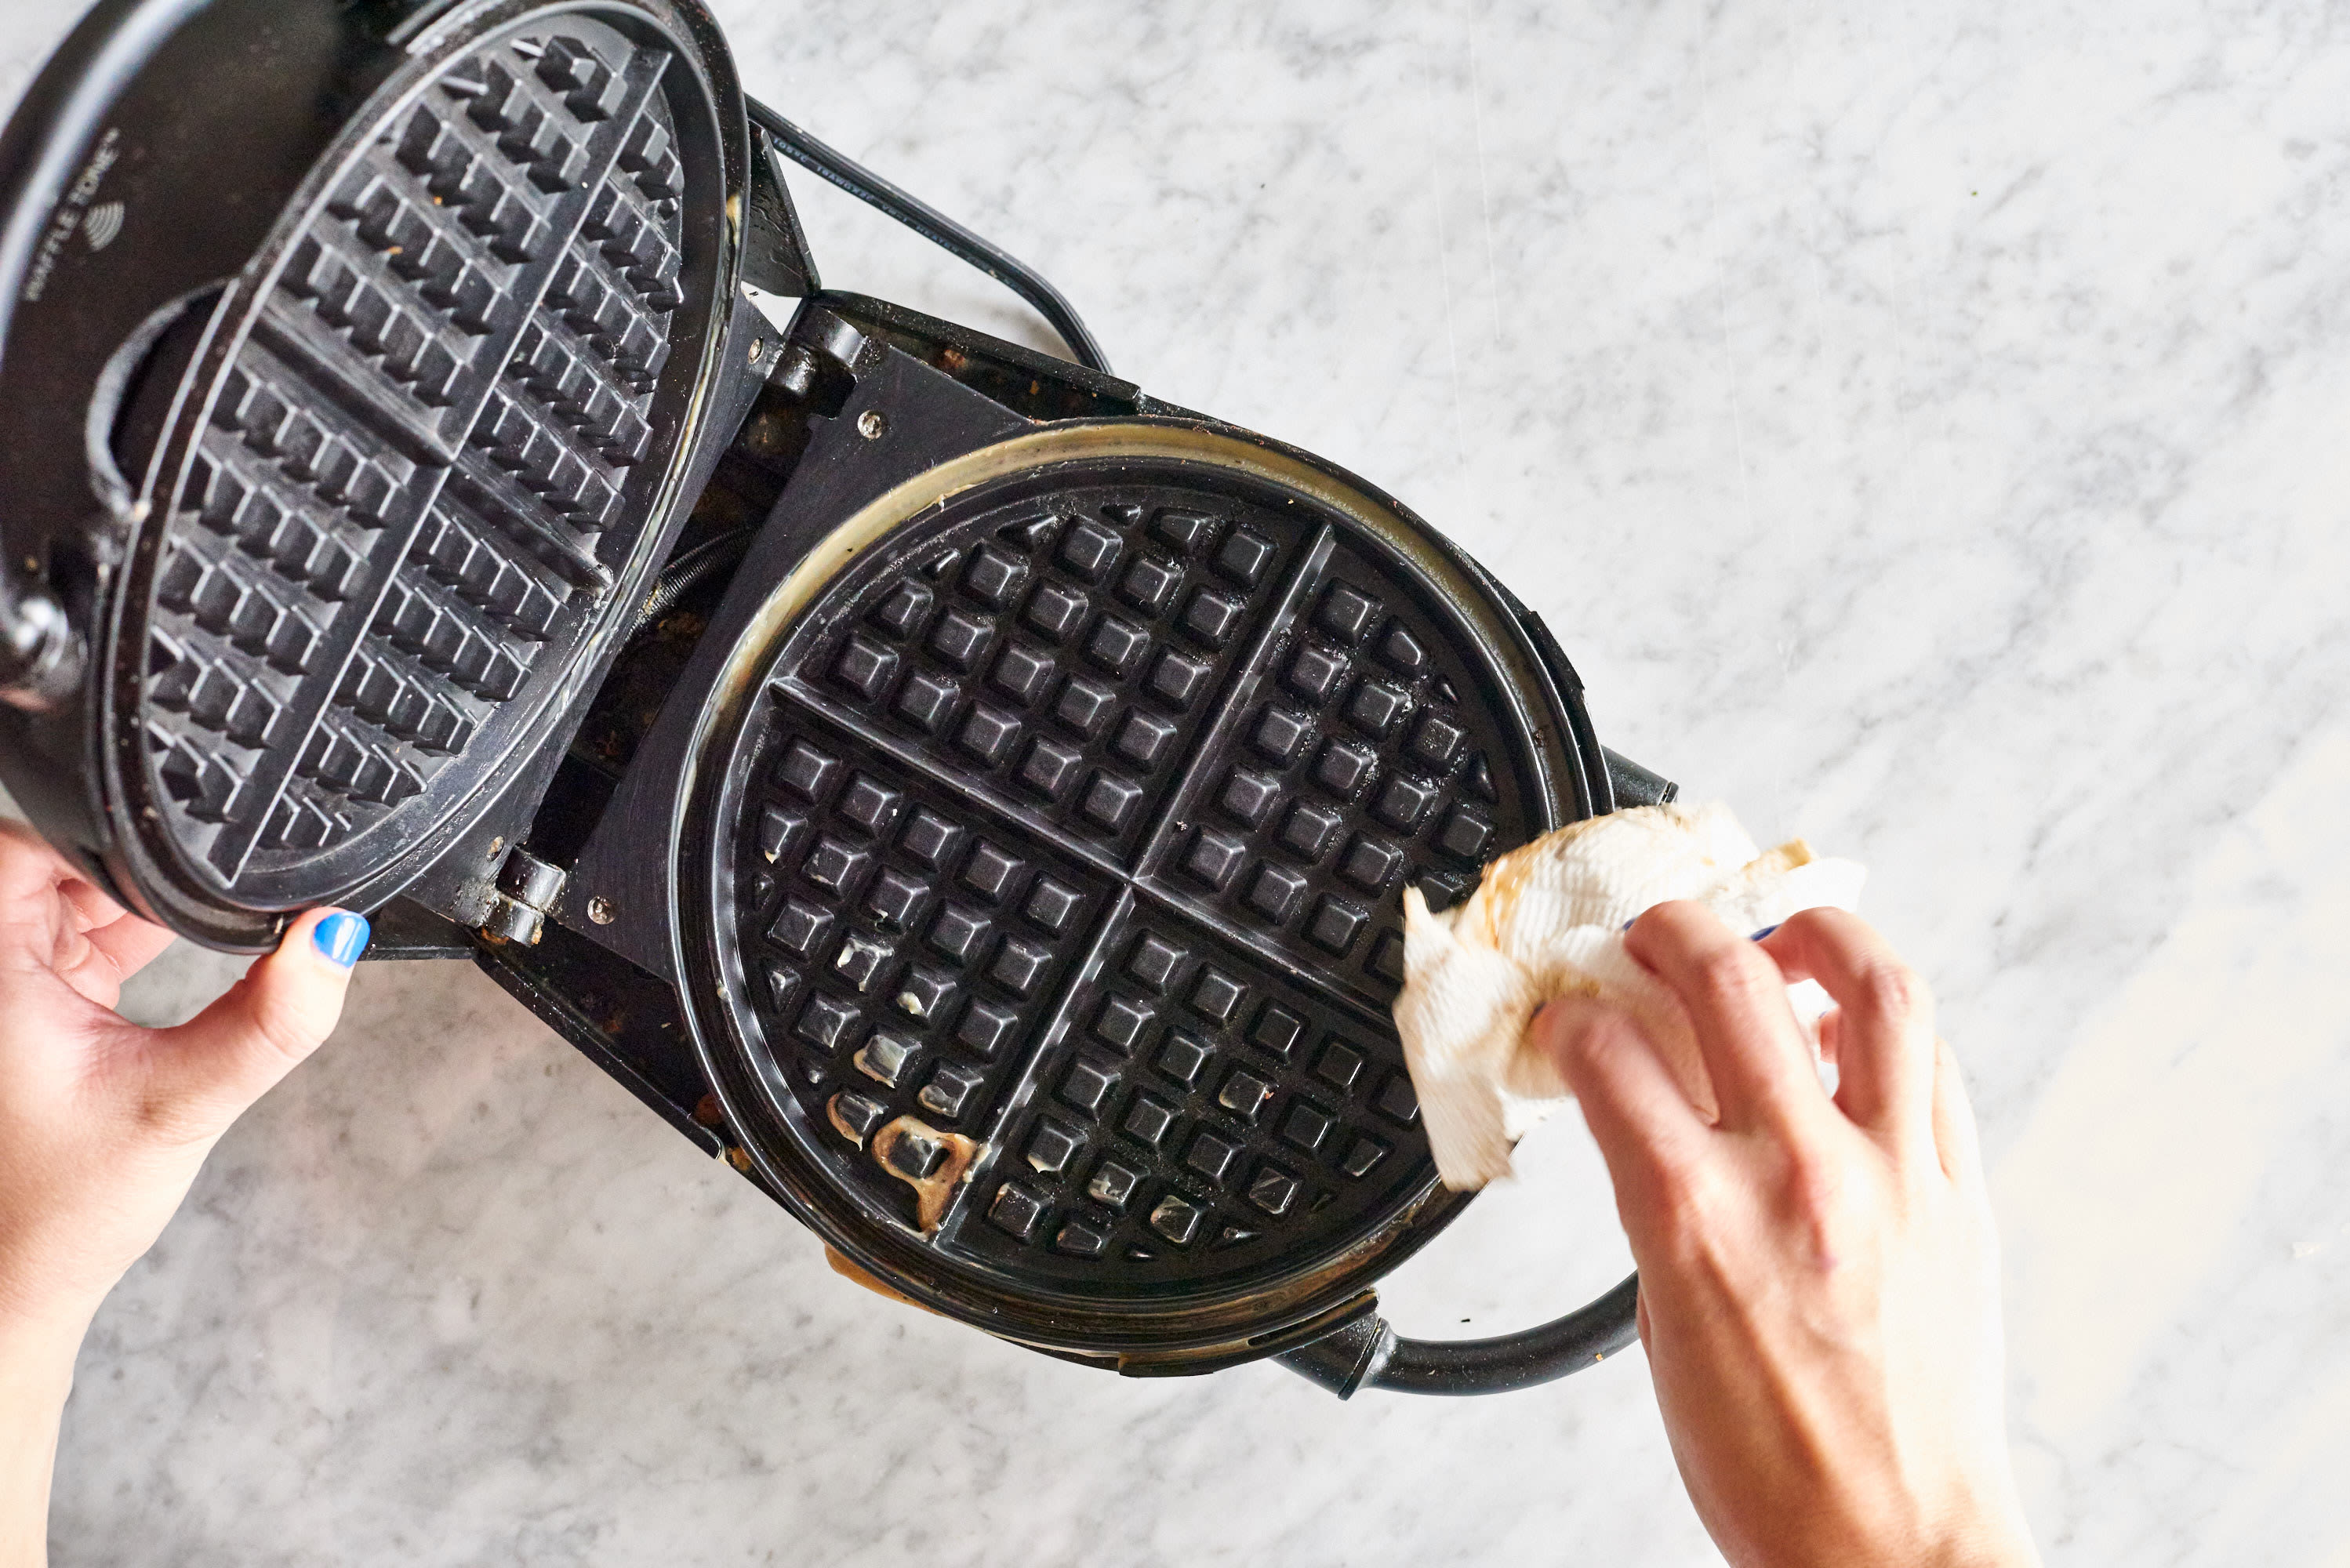 https://cdn.apartmenttherapy.info/image/upload/v1566580120/k/Photo/Lifestyle/2019-09-how-to-clean-a-waffle-iron/How-to-Clean-an-Impossibly-Gross-Waffle-Iron_057.jpg